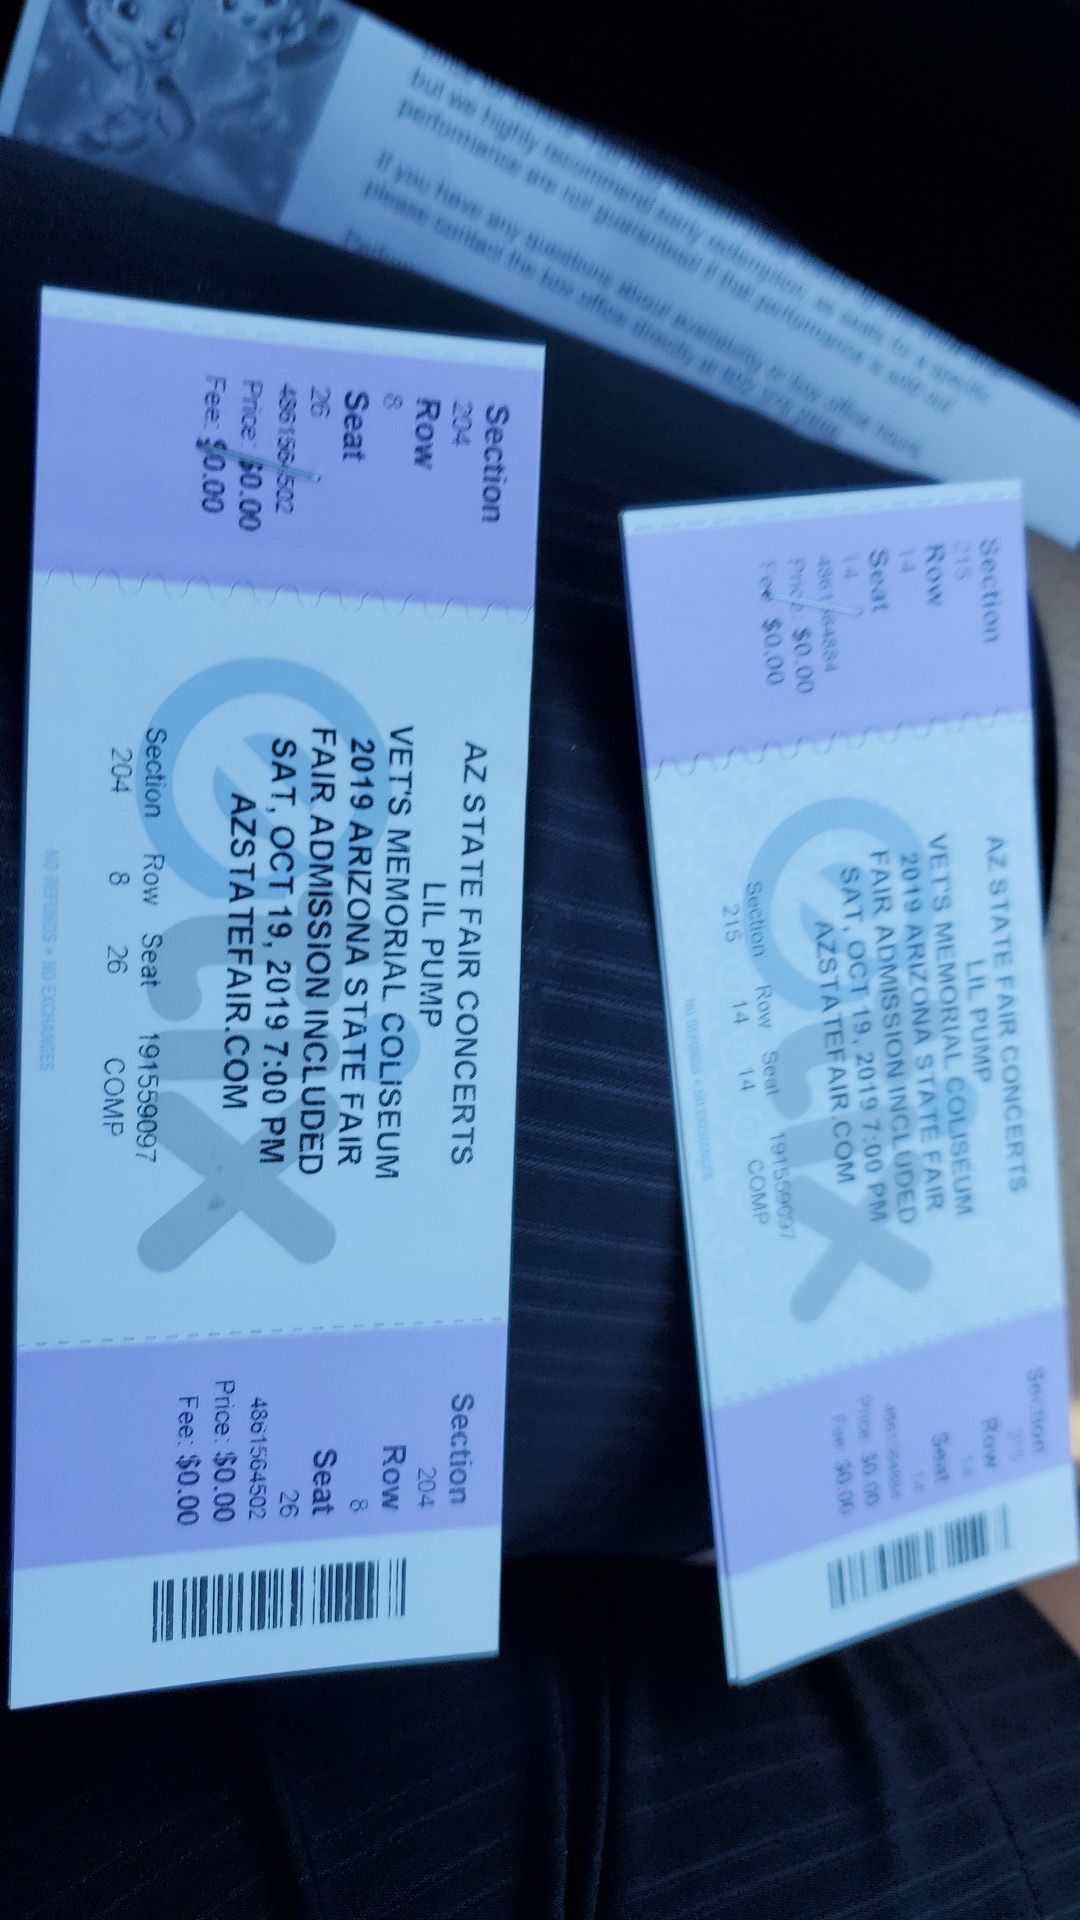 4 tickets for today's concert at the fair